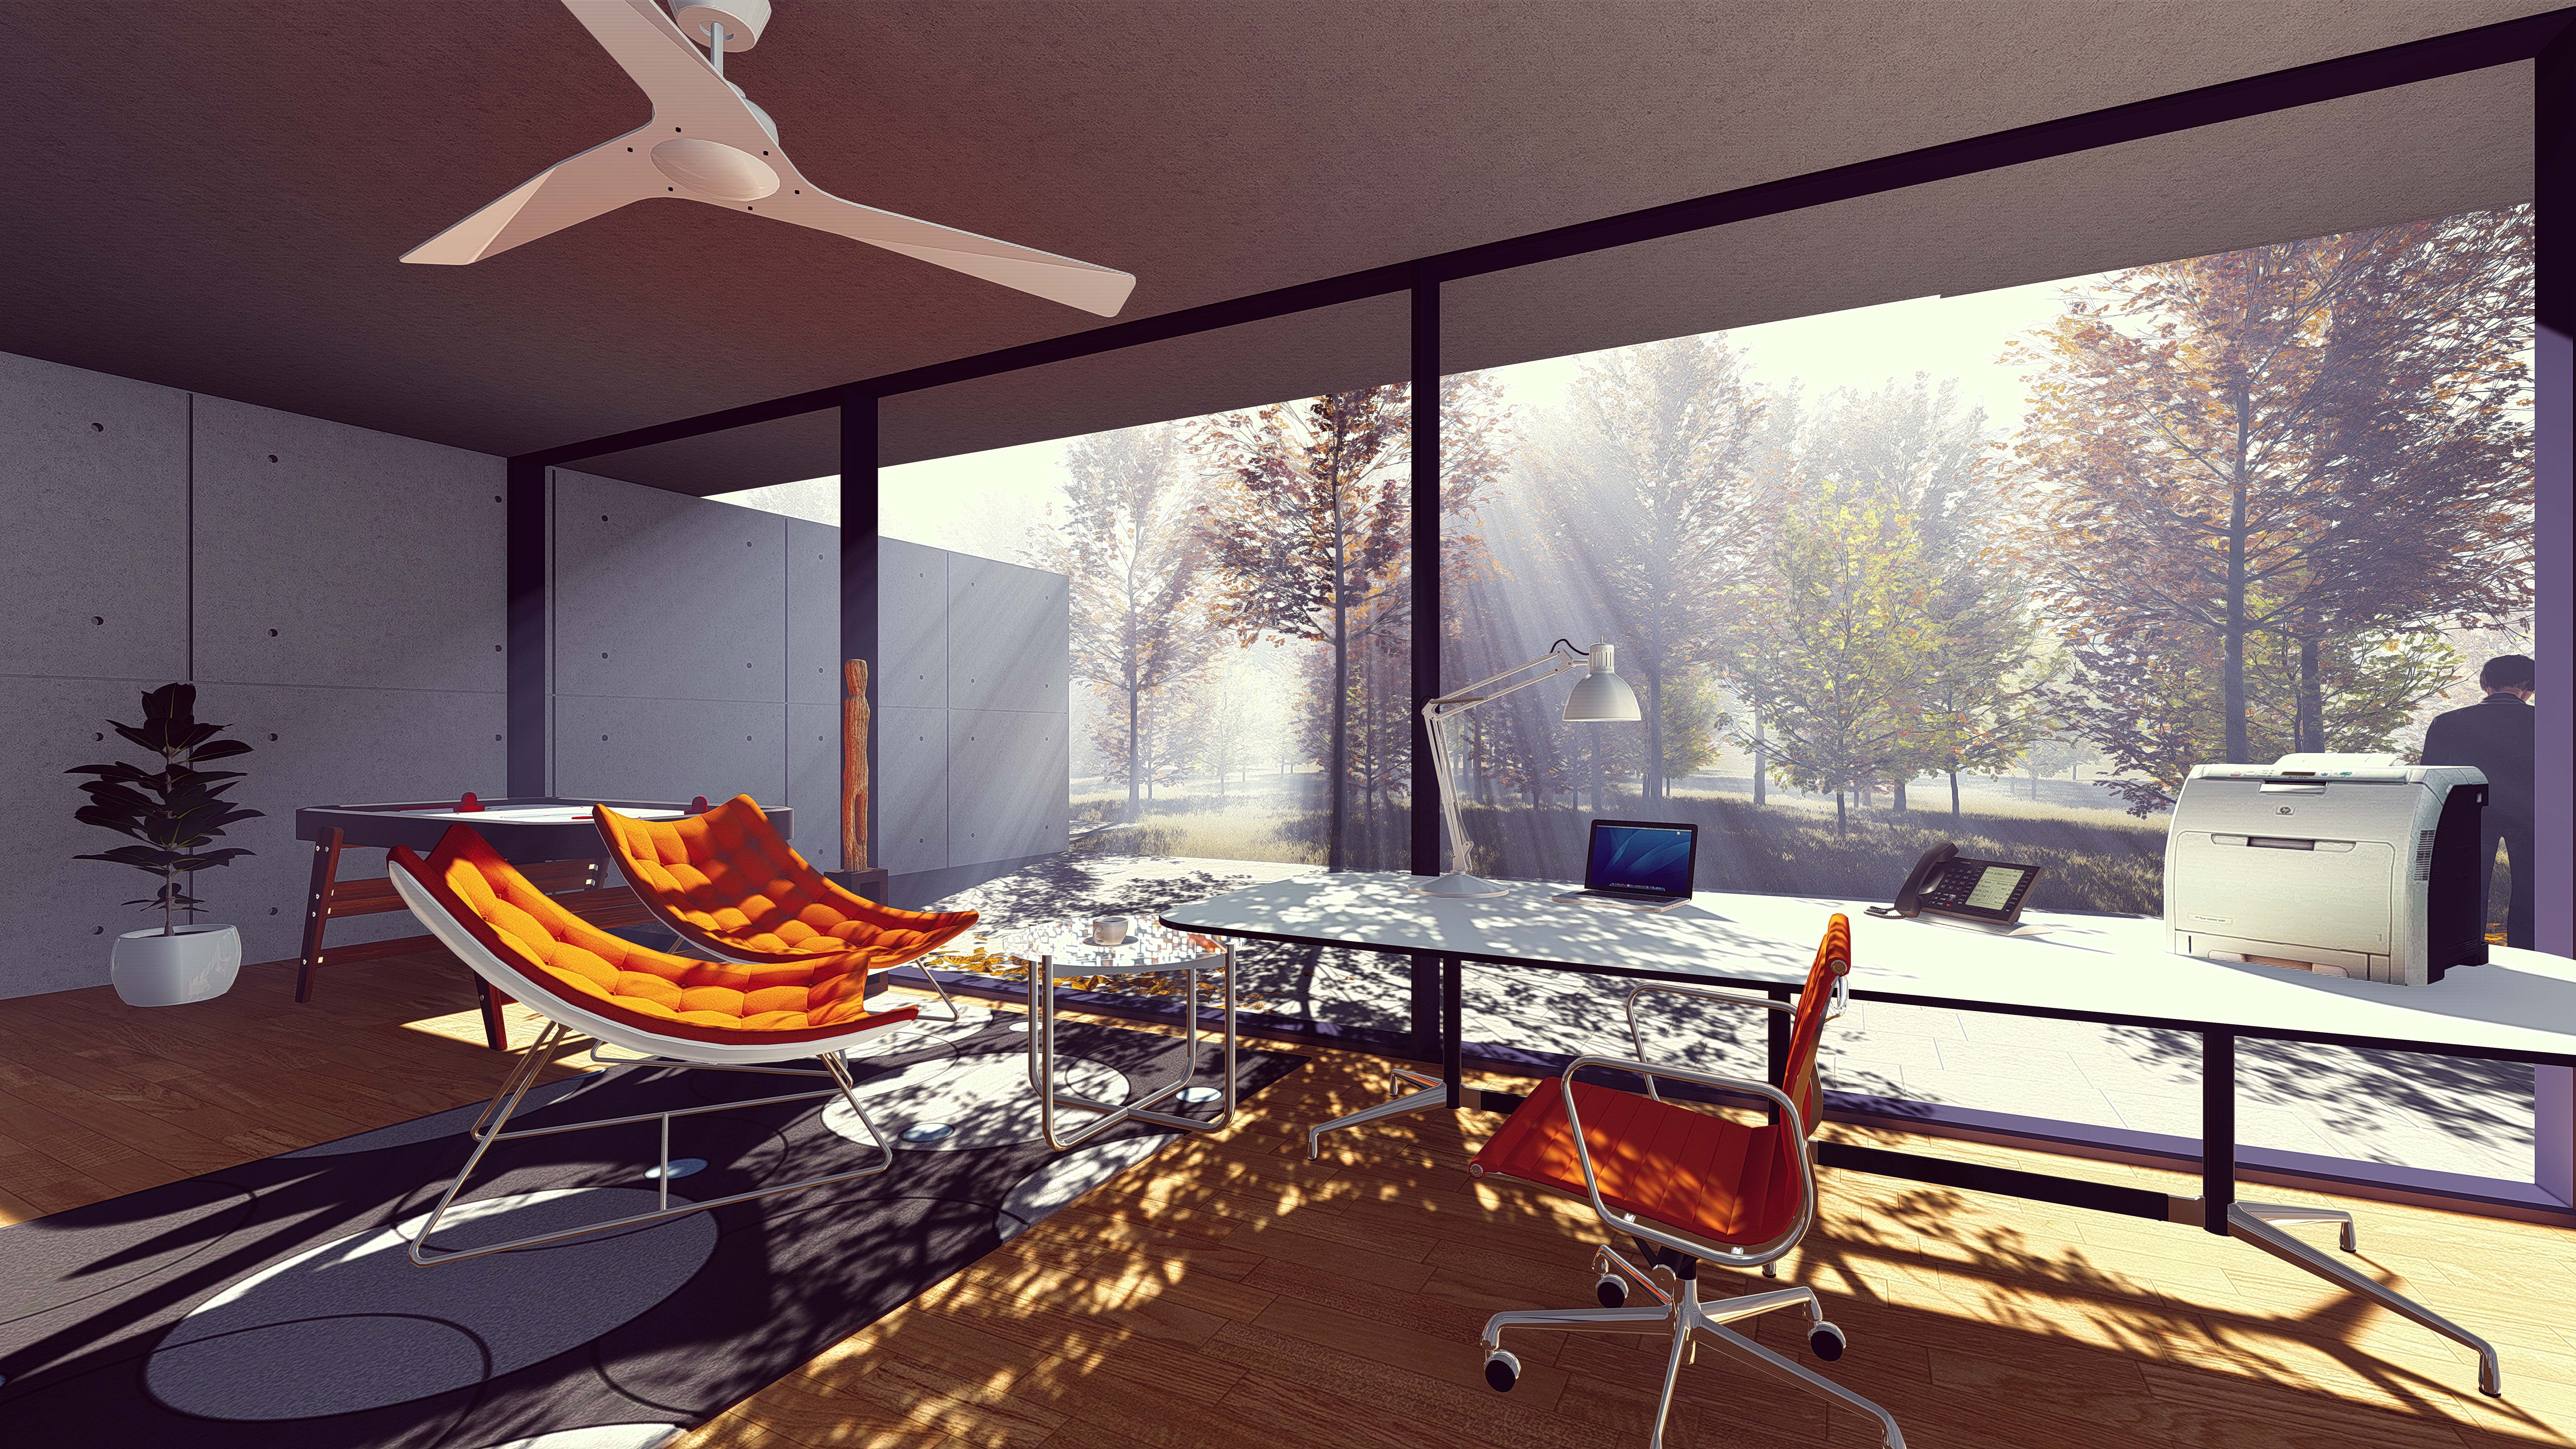 Rendering Lighting Tips for More Realistic Interior Scenes